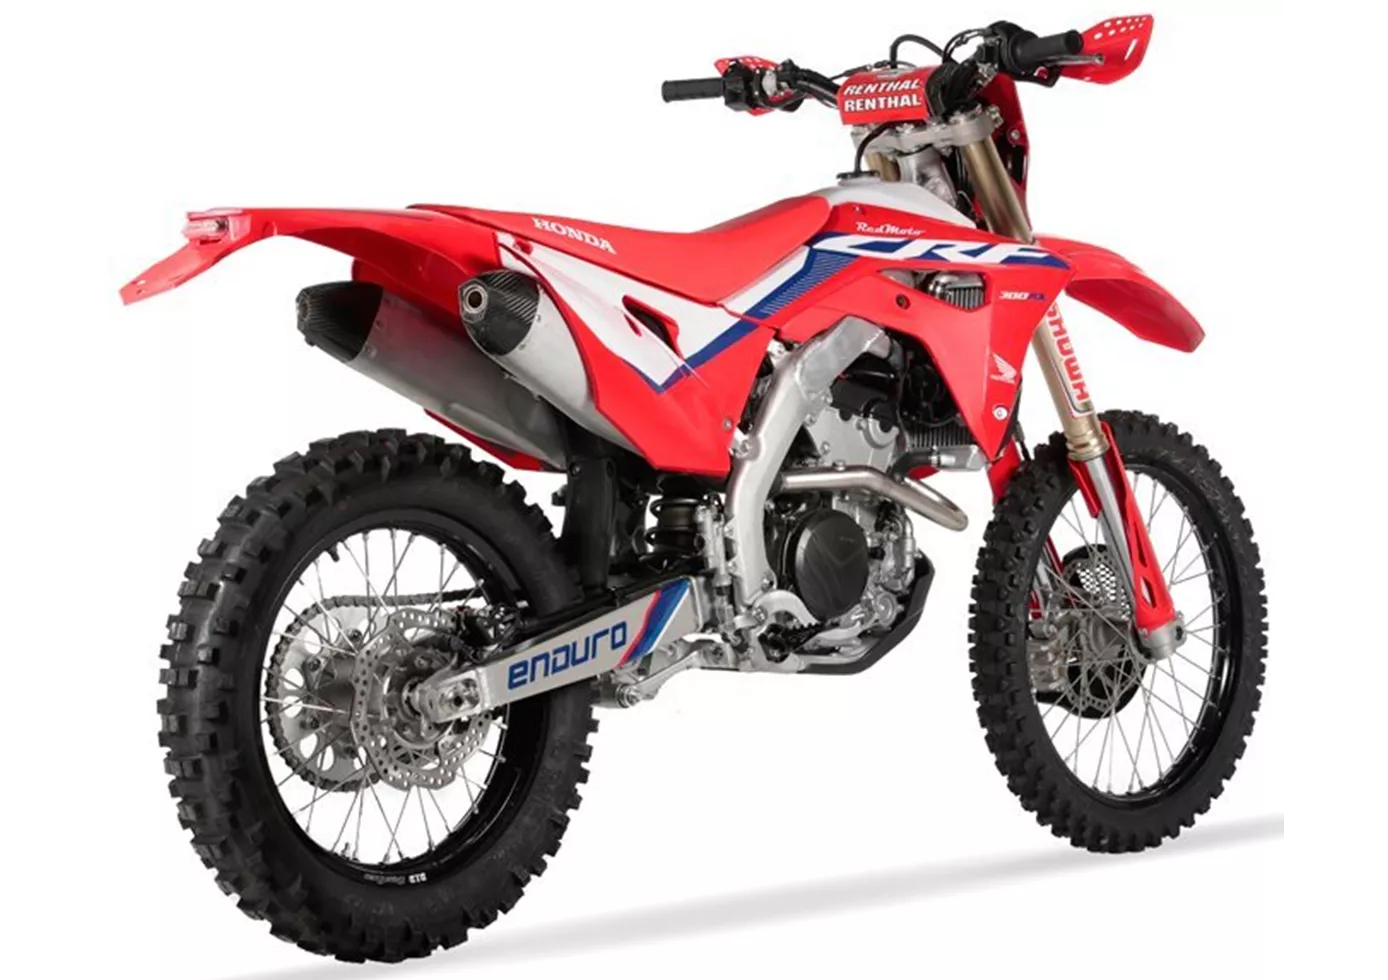 Red Moto CRF 300RX Enduro Special 2021